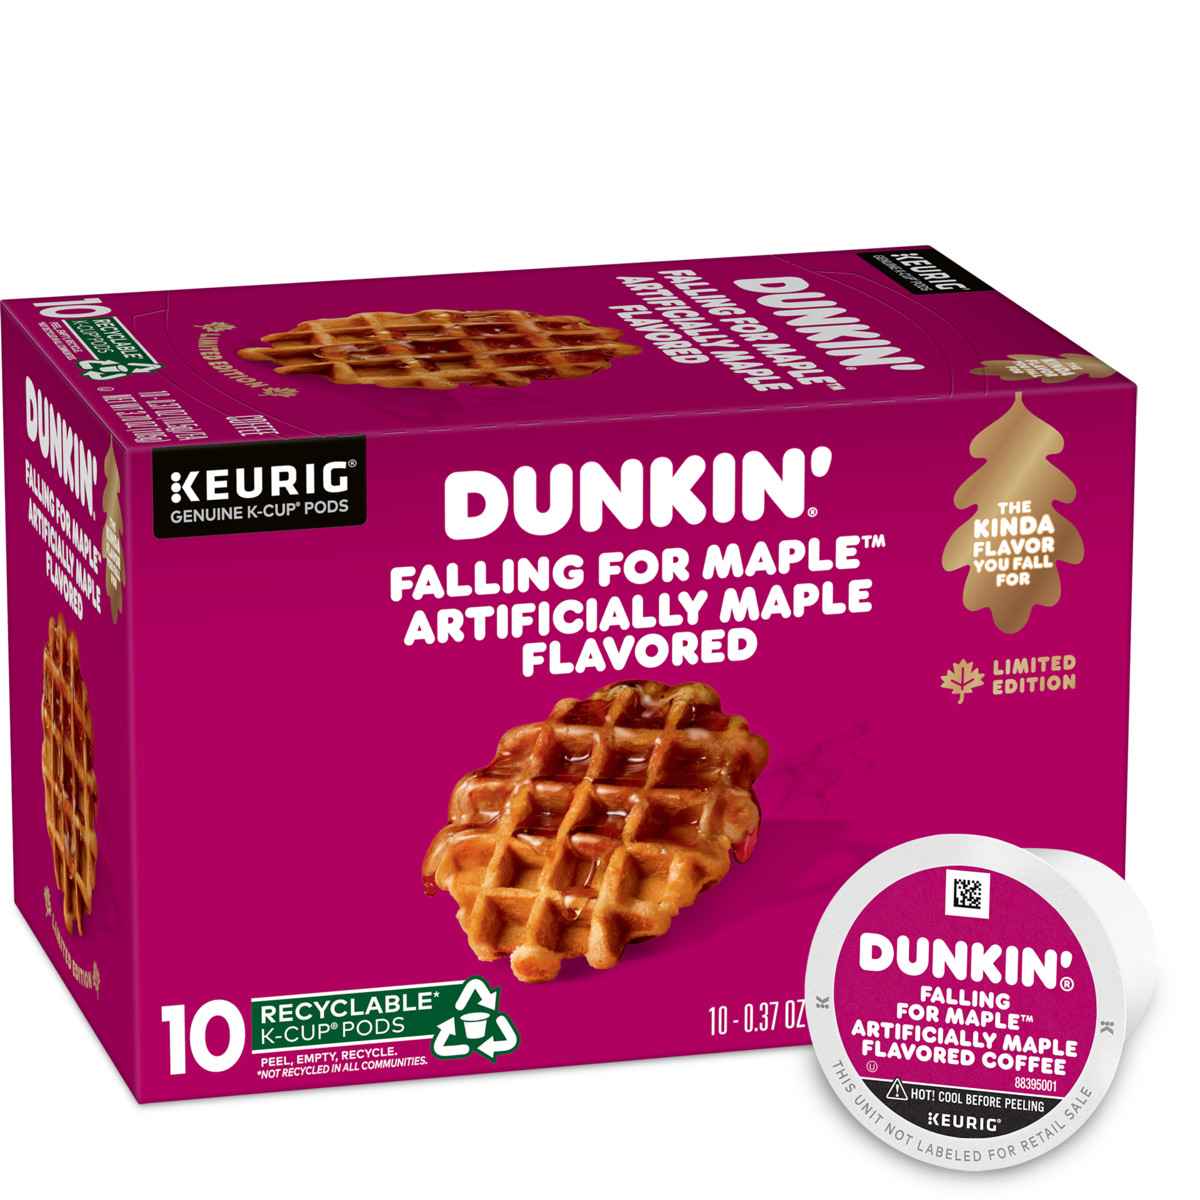 Dunkin'® Falling for Maple™ Artificially Flavored Maple Coffee K-Cup® pods in a mauve box with an image of a circular cooked waffle on it and a K-Cup® pod on its side in the foreground